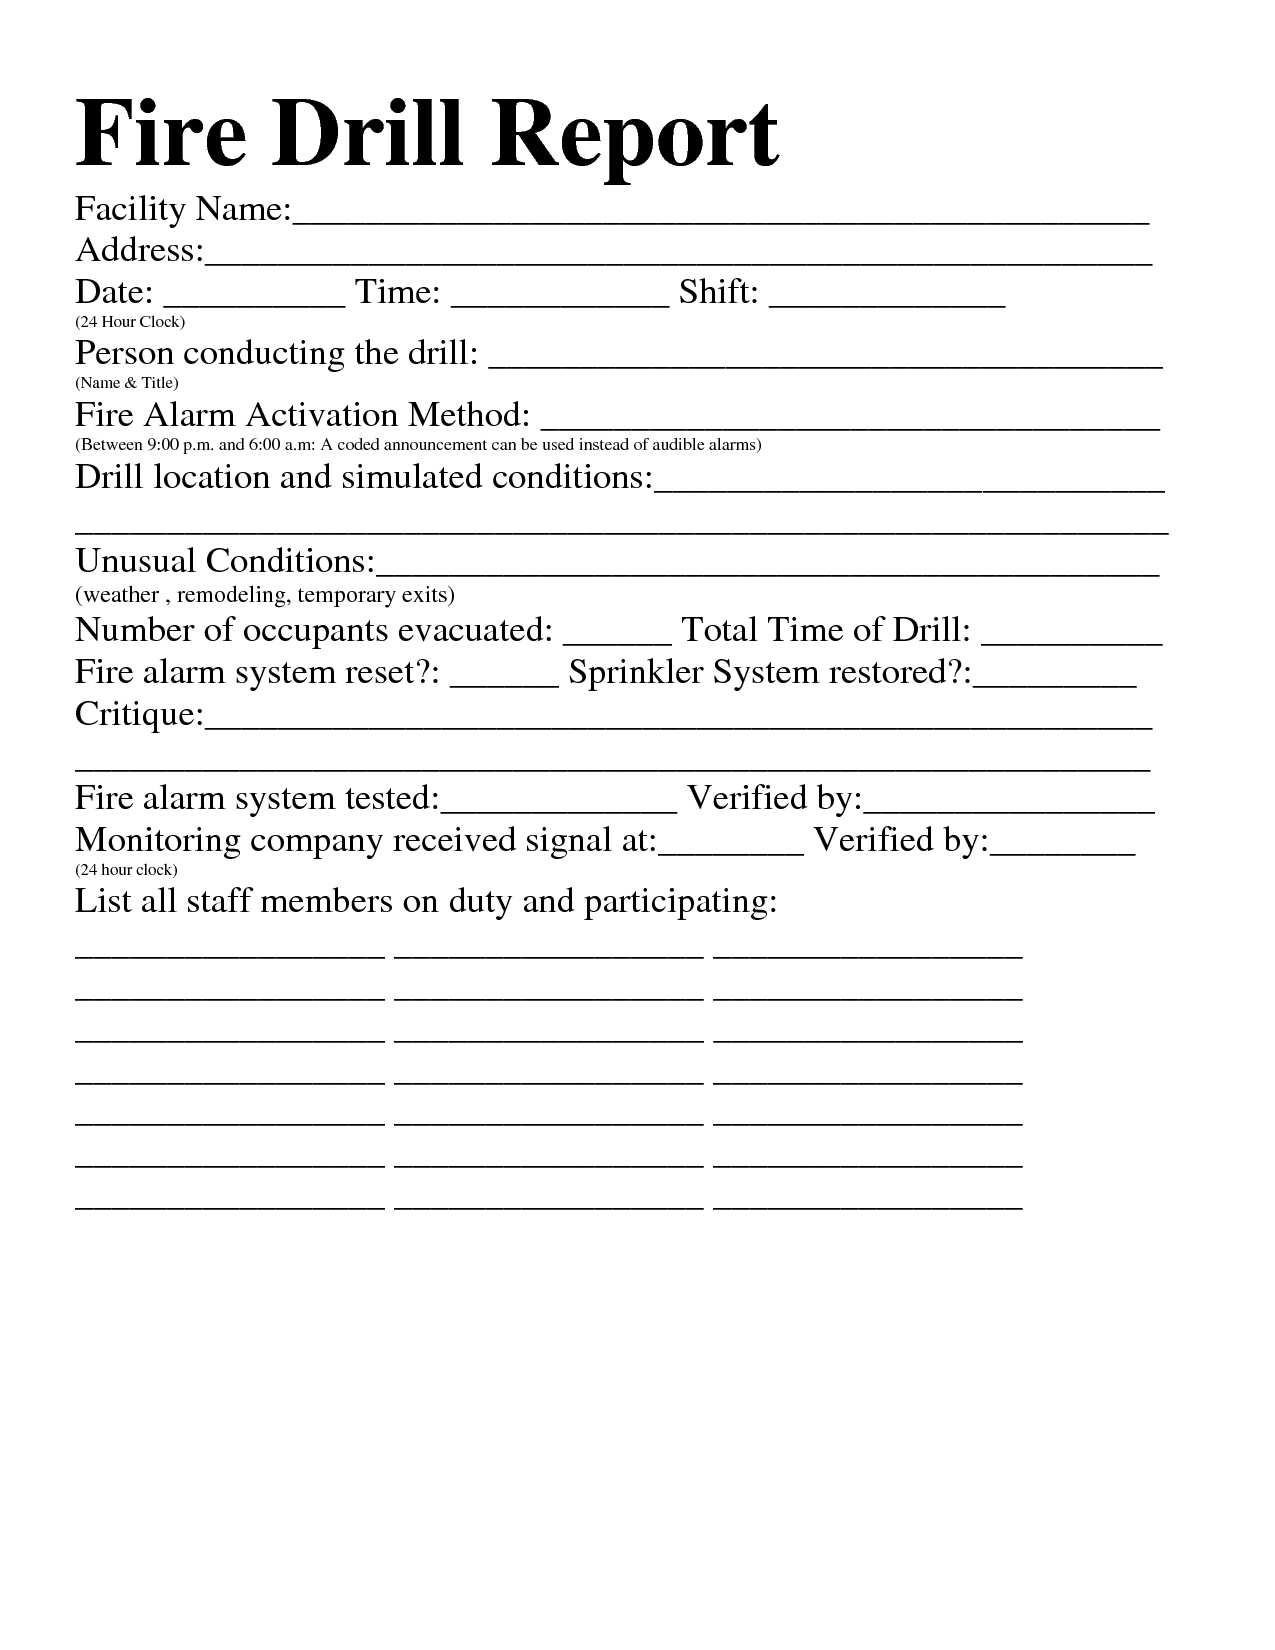 22 Images Of Osha Fire Drill Safety Template | Jackmonster Inside Emergency Drill Report Template